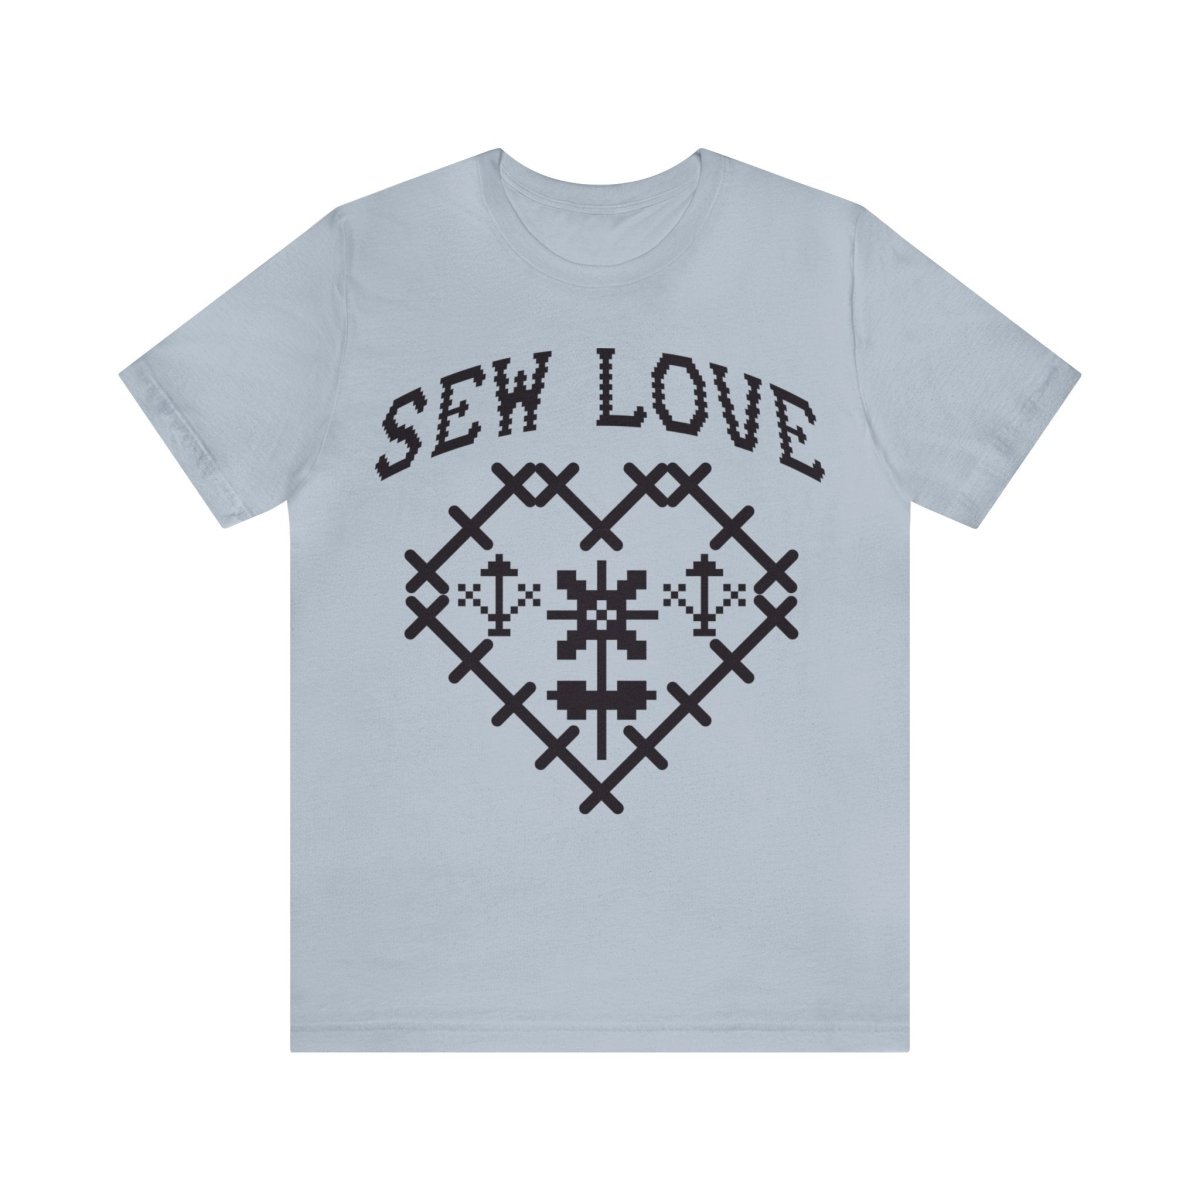 Sew Love Premium T-Shirt, Sewing Grows Love, Stitch, Needlepoint, Embroidery, Craft Gift Skills